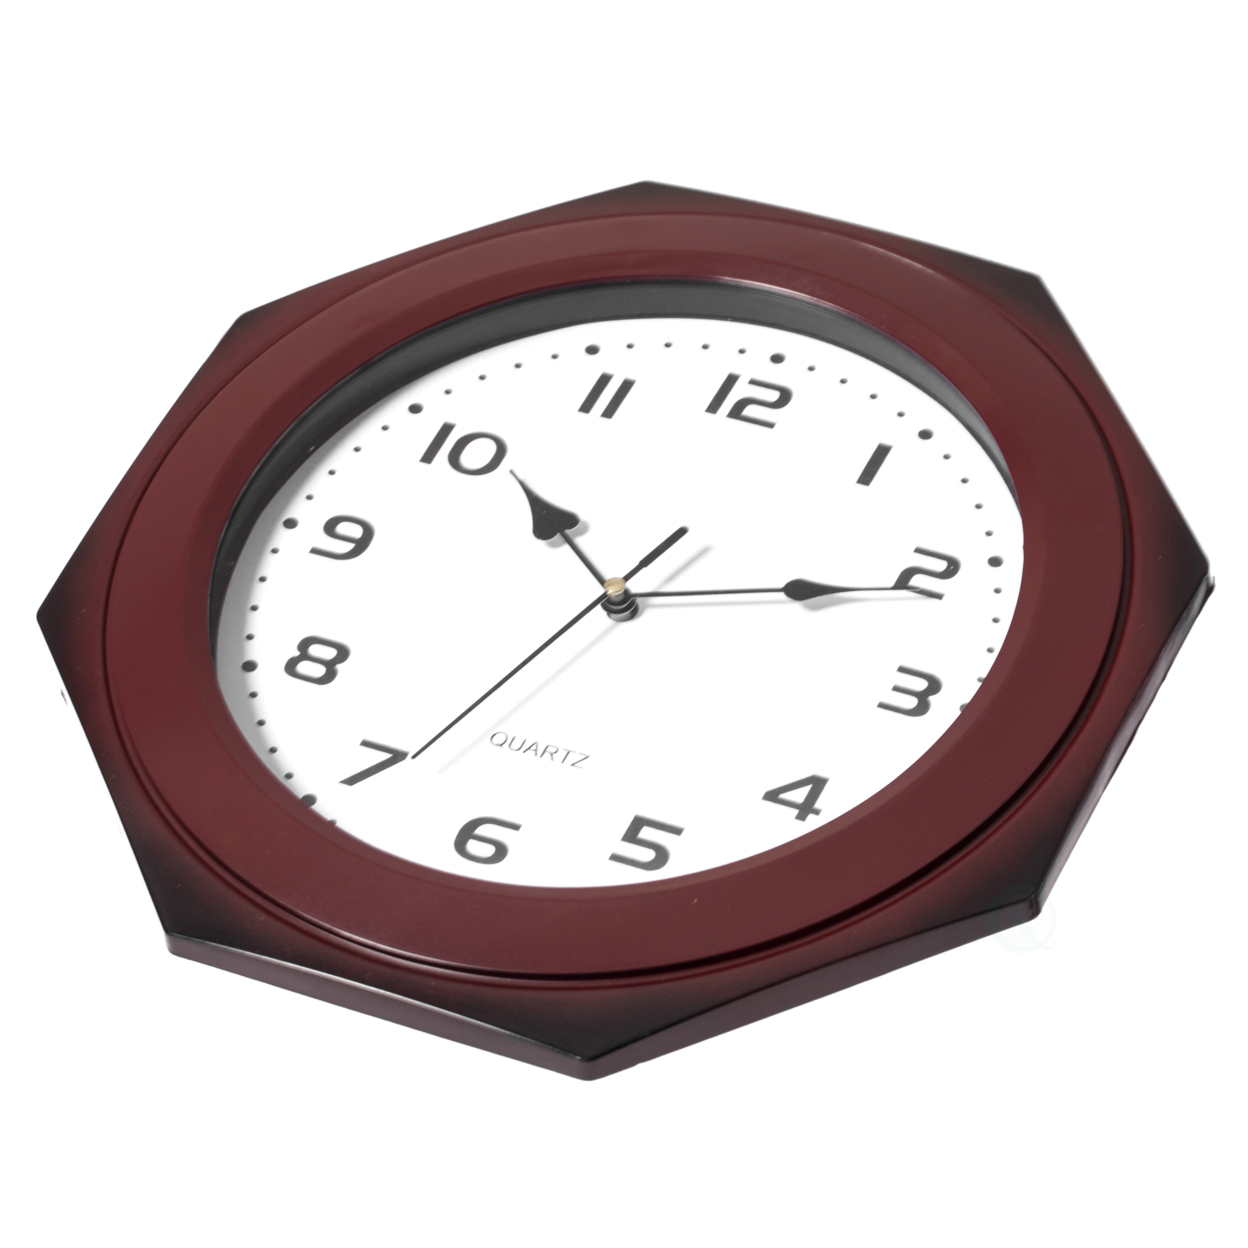 Brown Modern Decorative Octagon Shaped Wood- Looking Plastic Wall Clock For Living Room, Kitchen, Or Dining Room